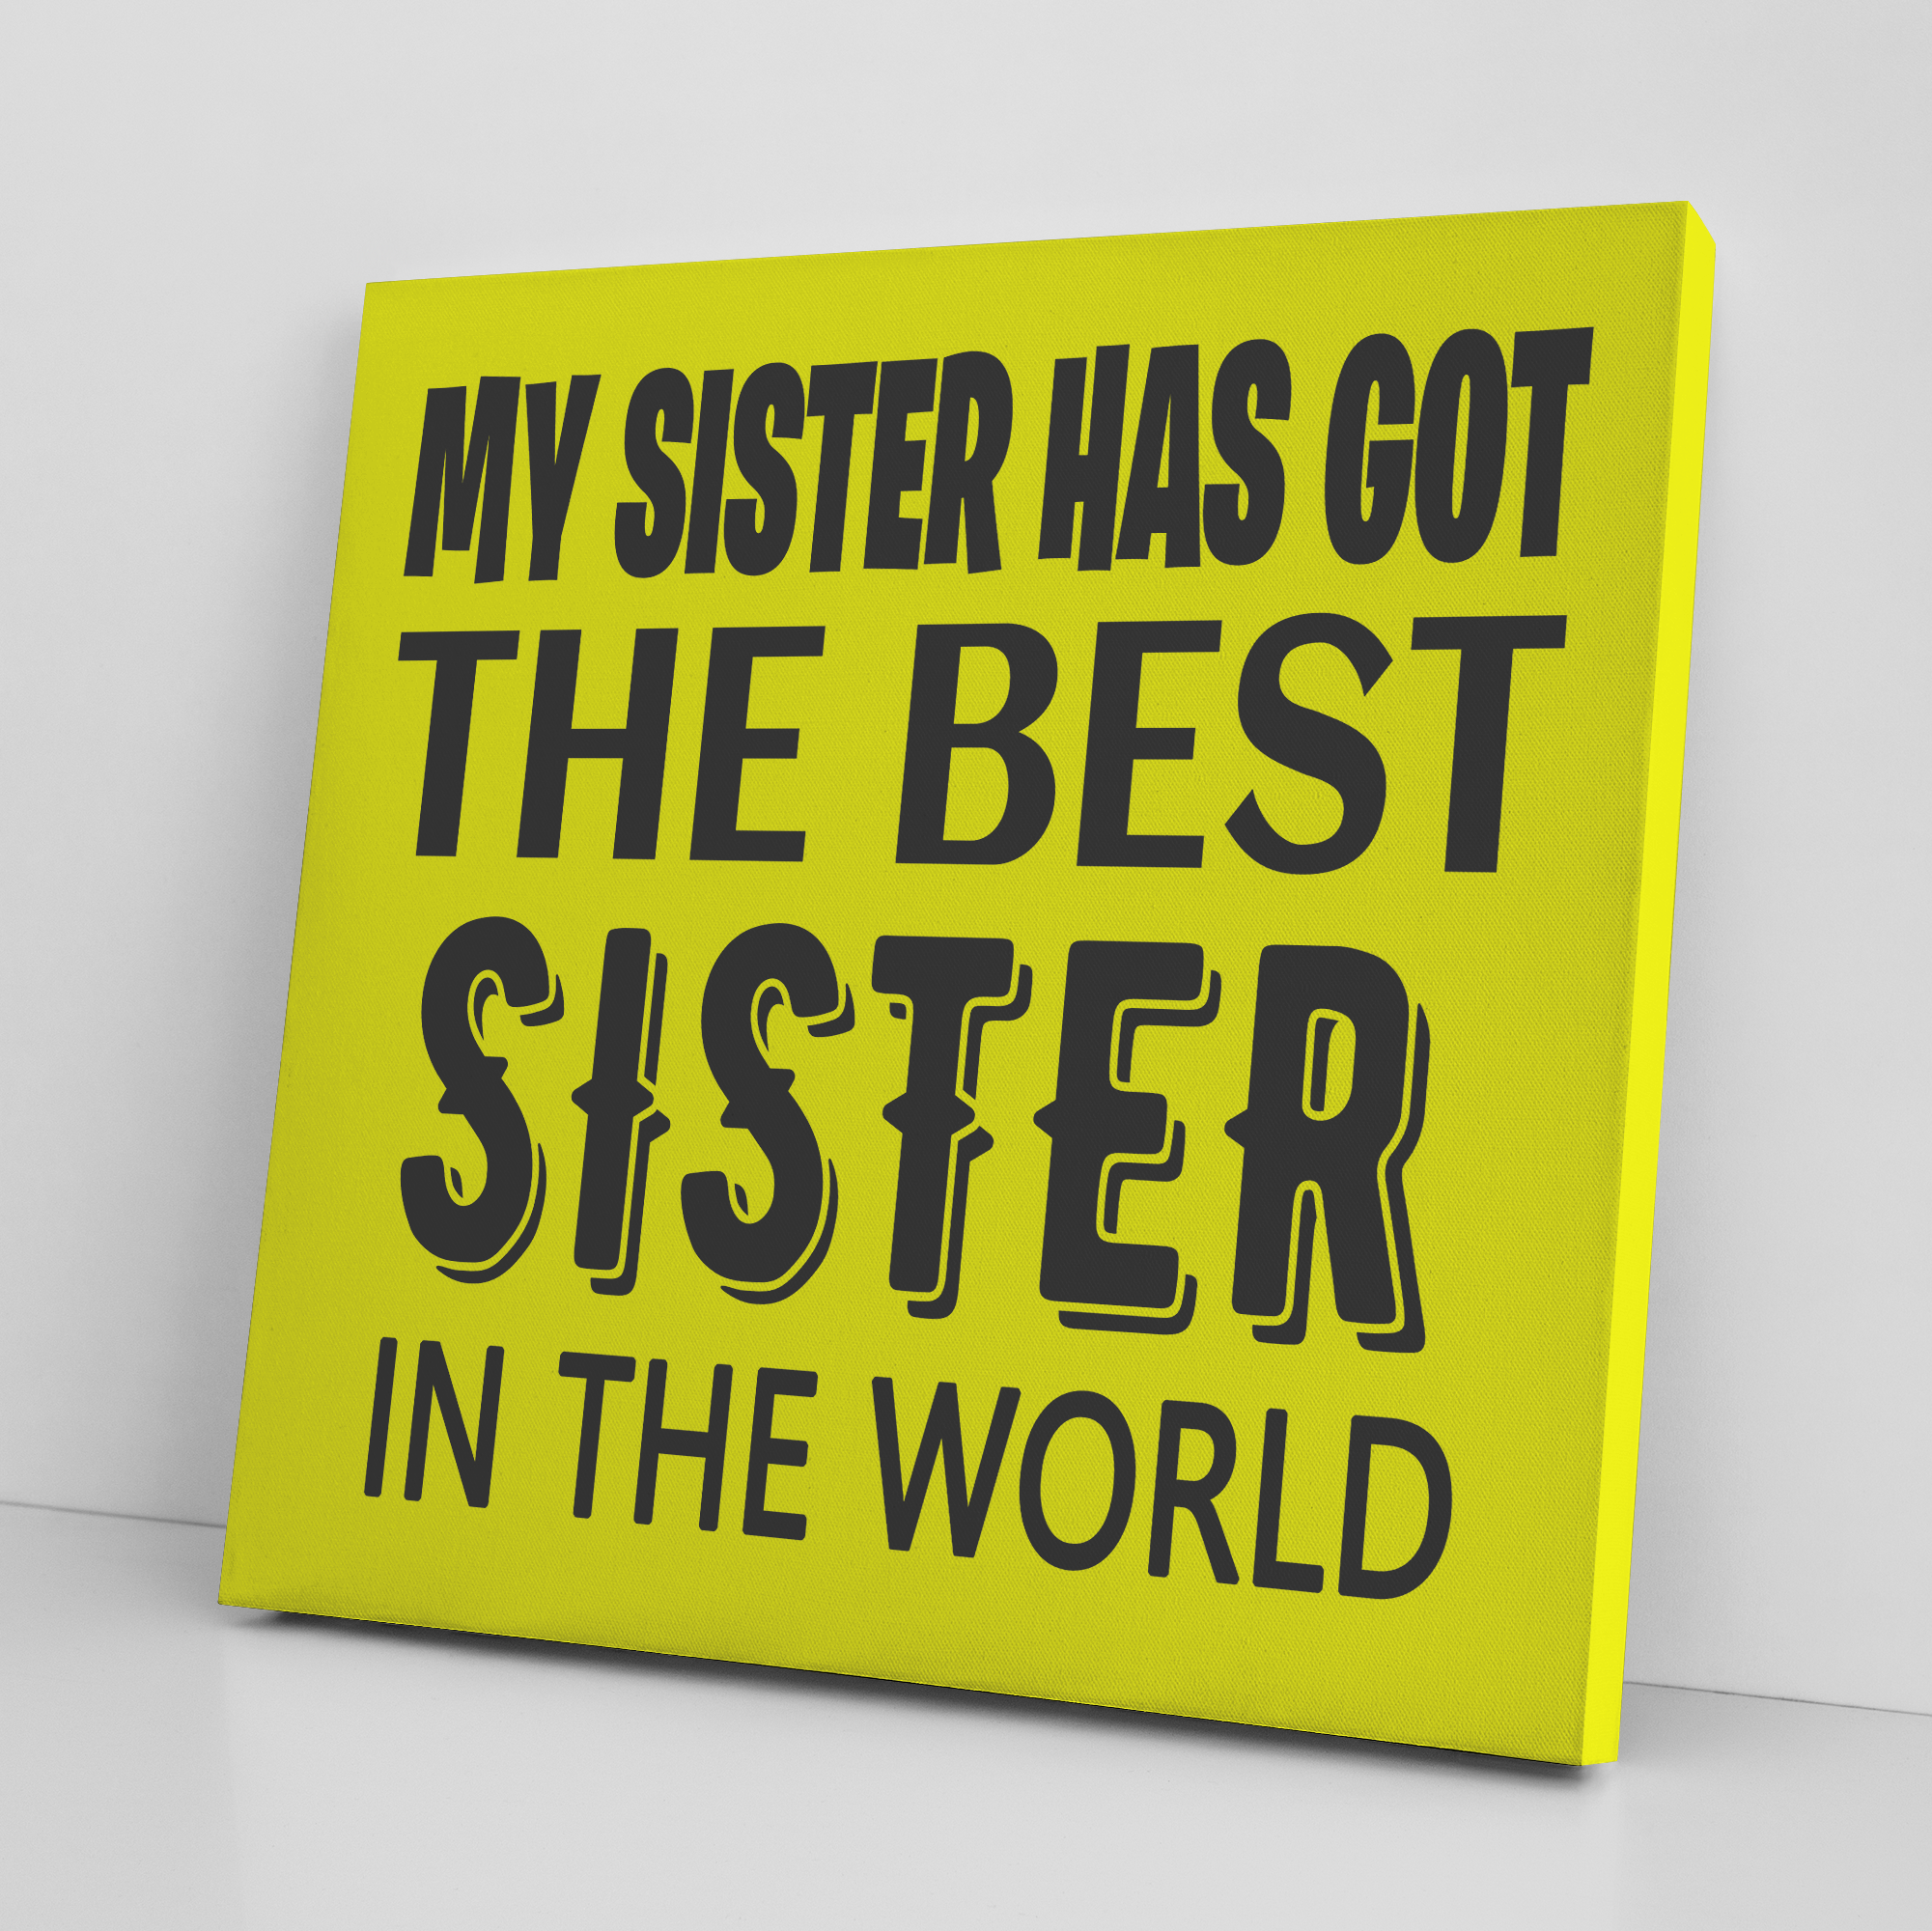 '' MY SISTER HAS GOT THE BEST SISTER'' CANVAS